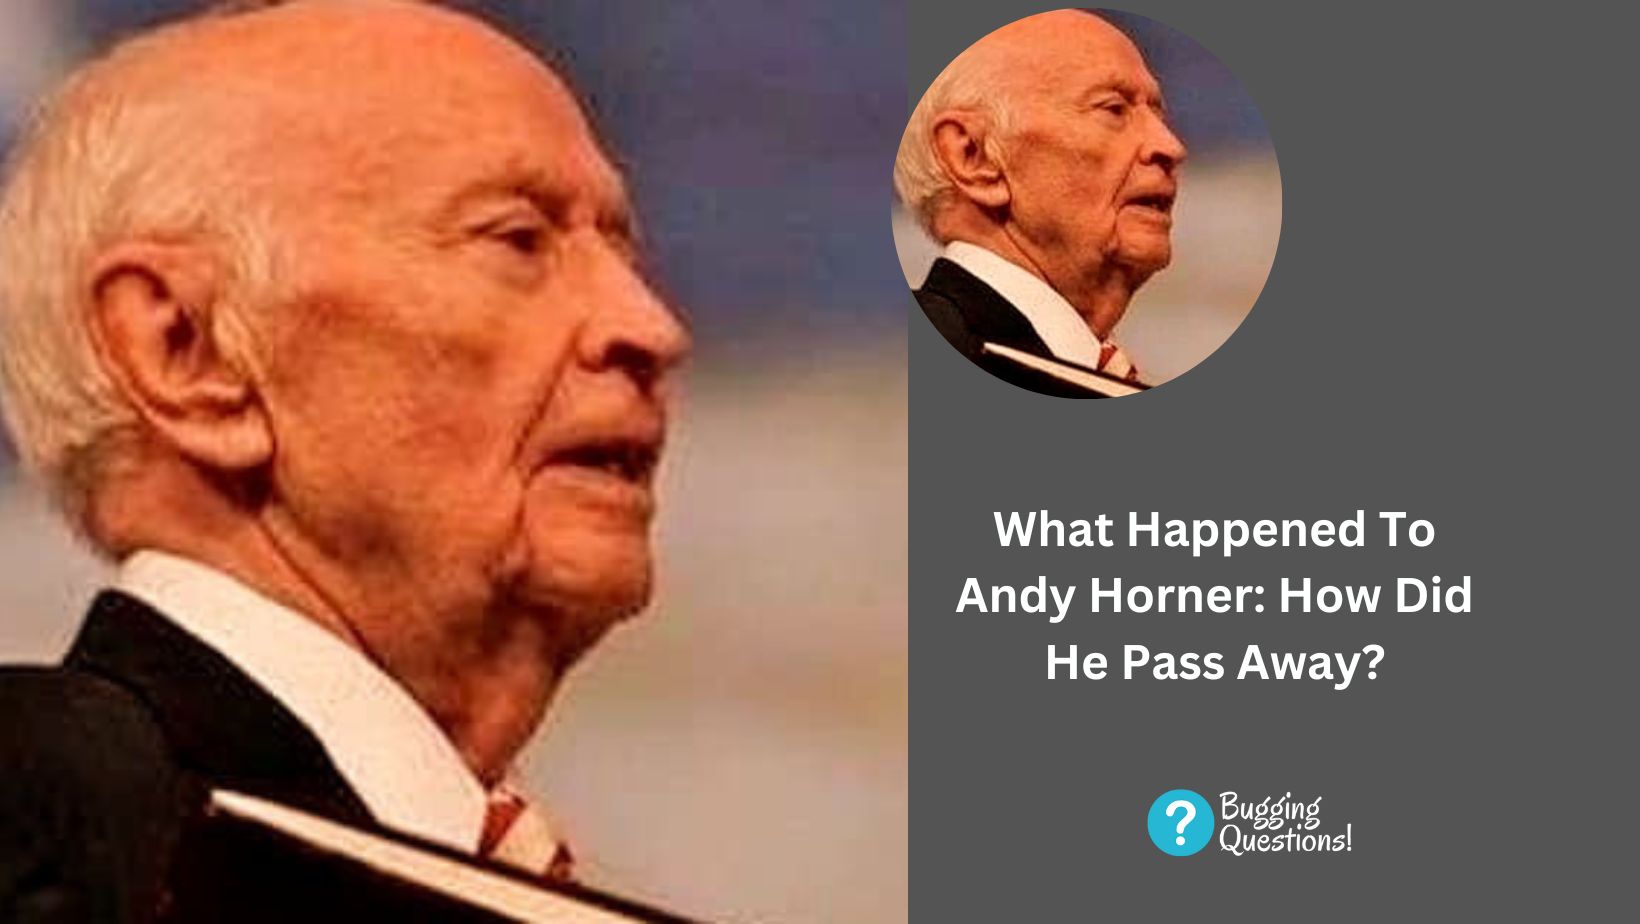 What Happened To Andy Horner: How Did He Pass Away?